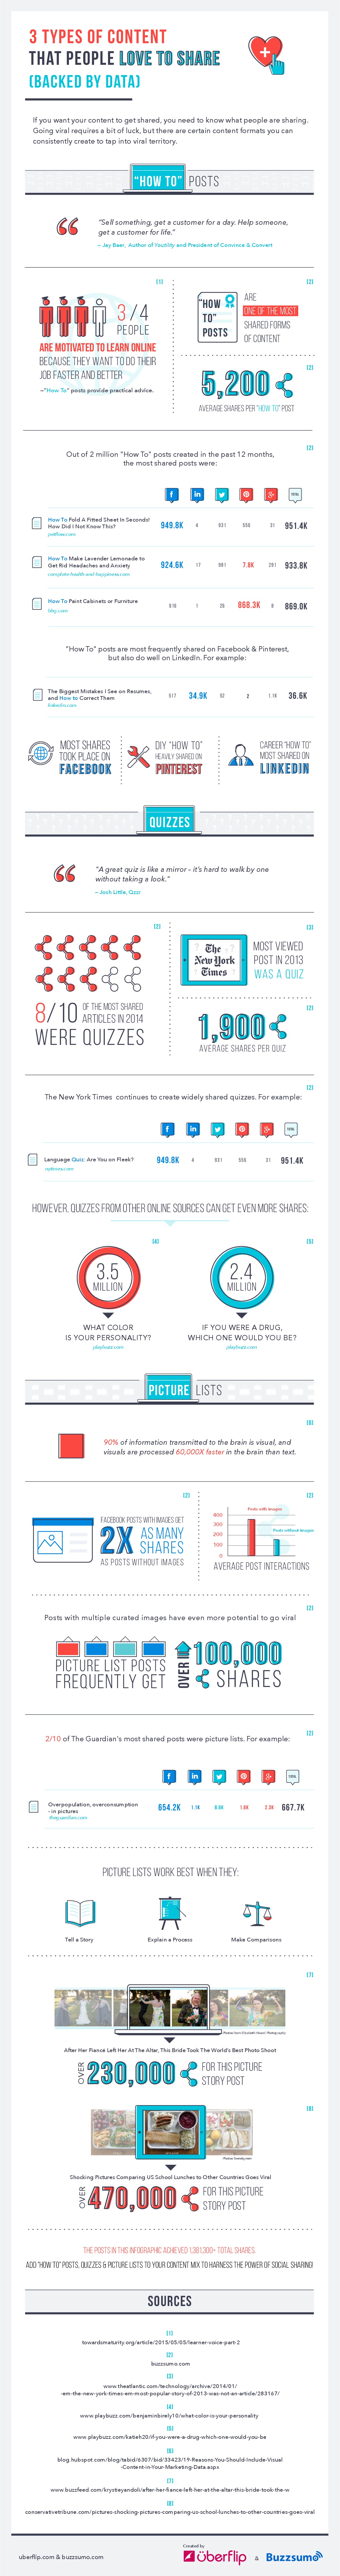 Content marketing infographic